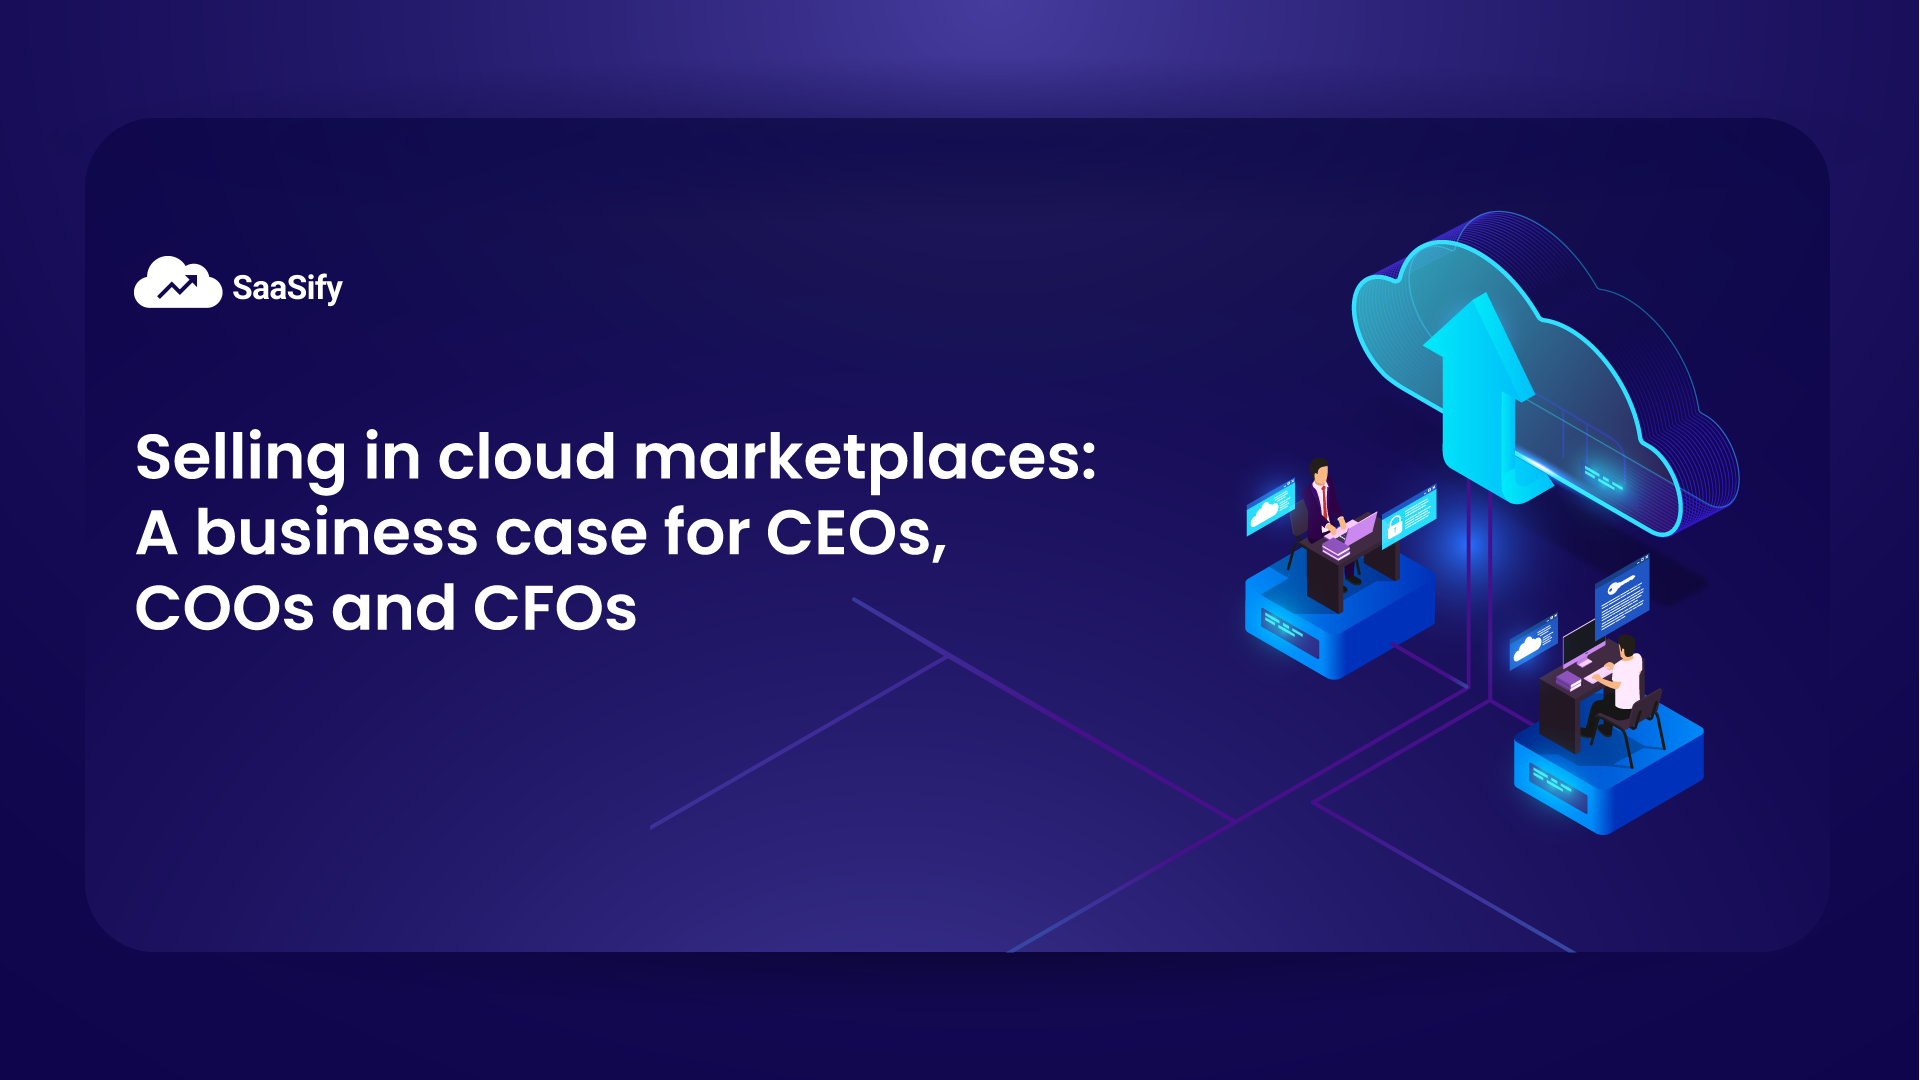 Selling in cloud marketplaces: A powerful business case for CEOs, COOs and CFOs